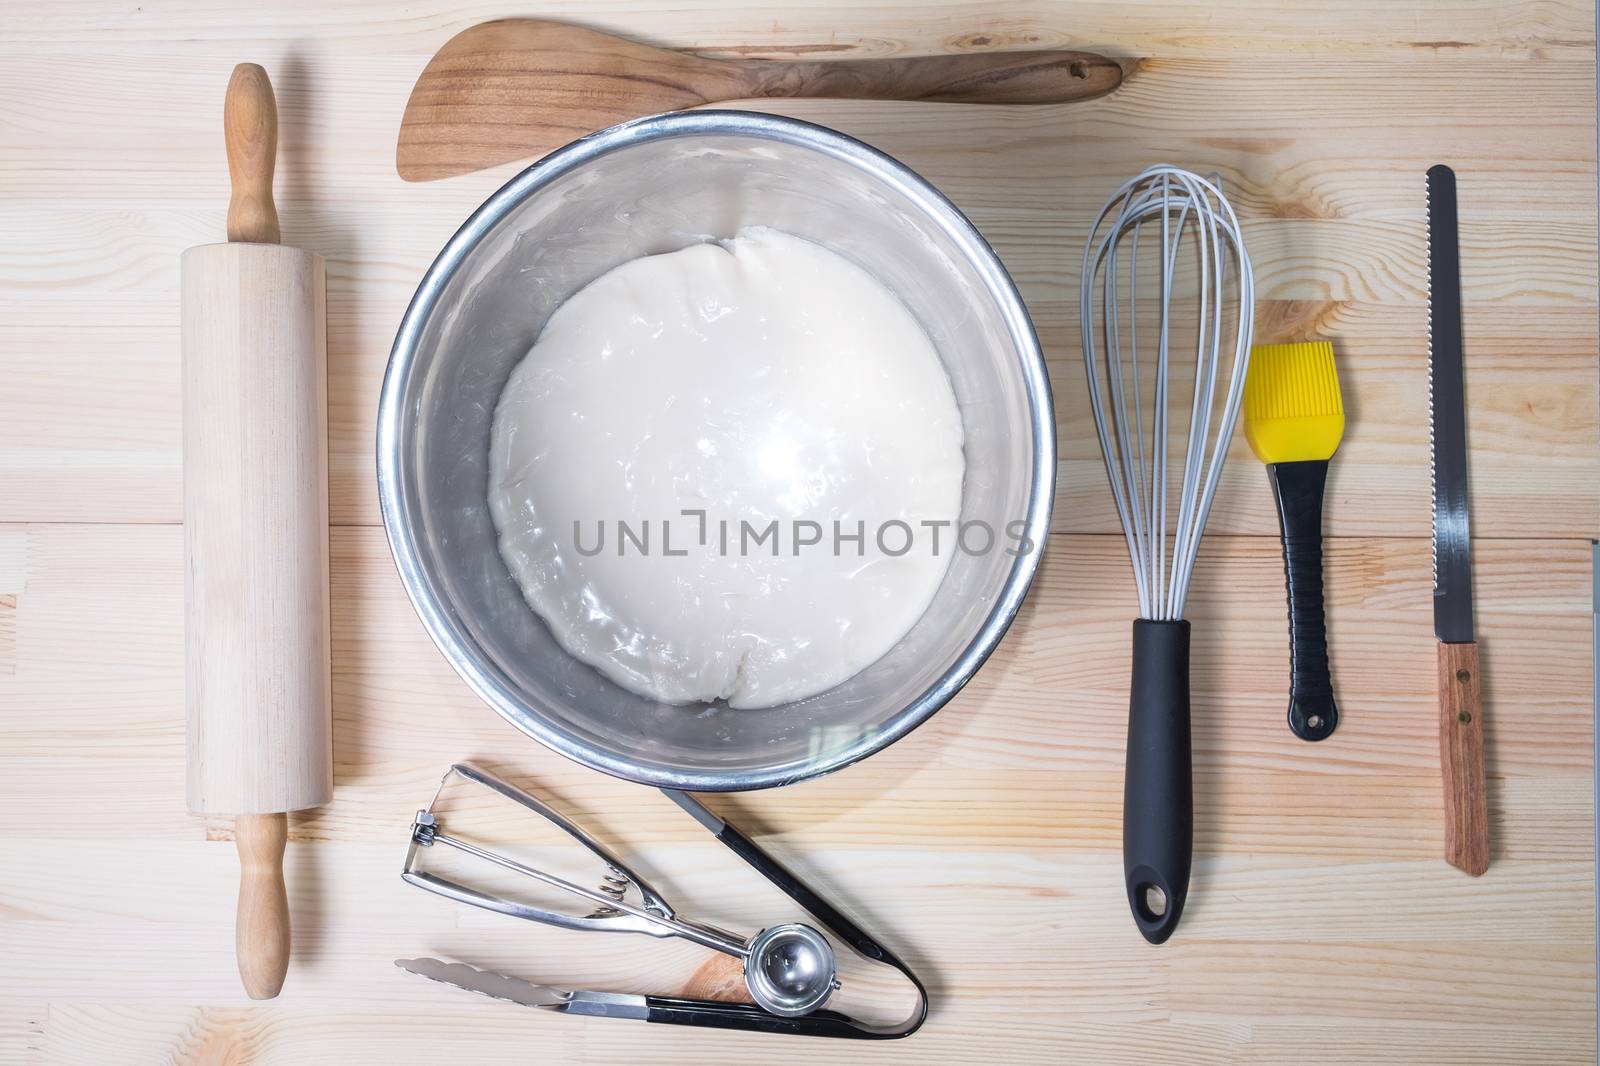 Food ingredients and kitchen utensils for cooking on wood background